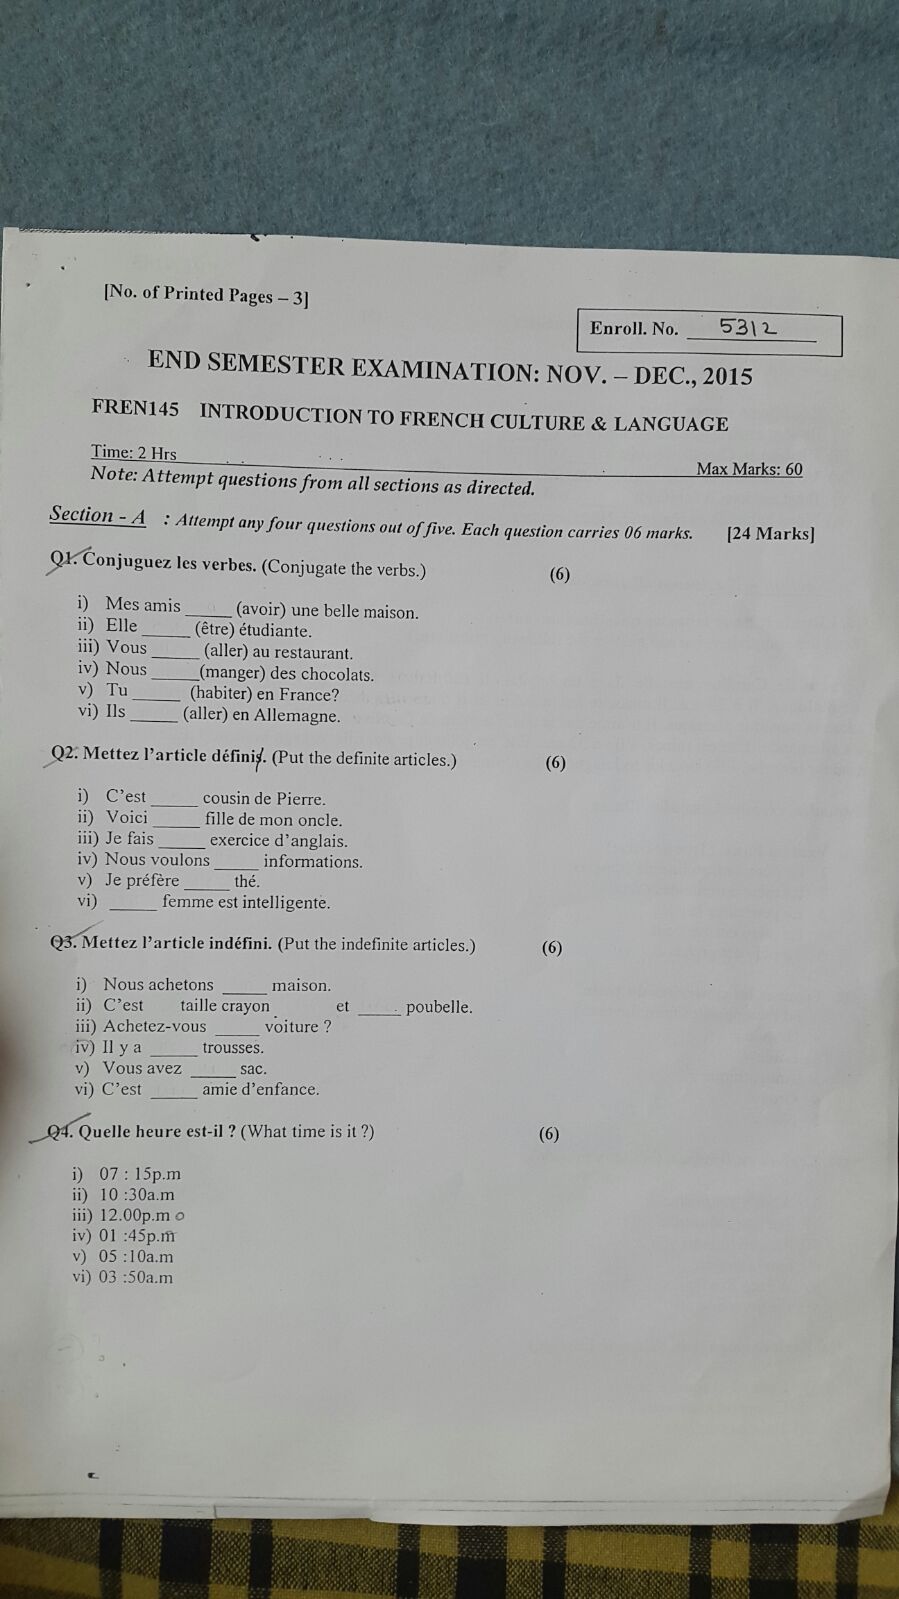 Amity french sem 1 question paper 2015-Fre01.JPG